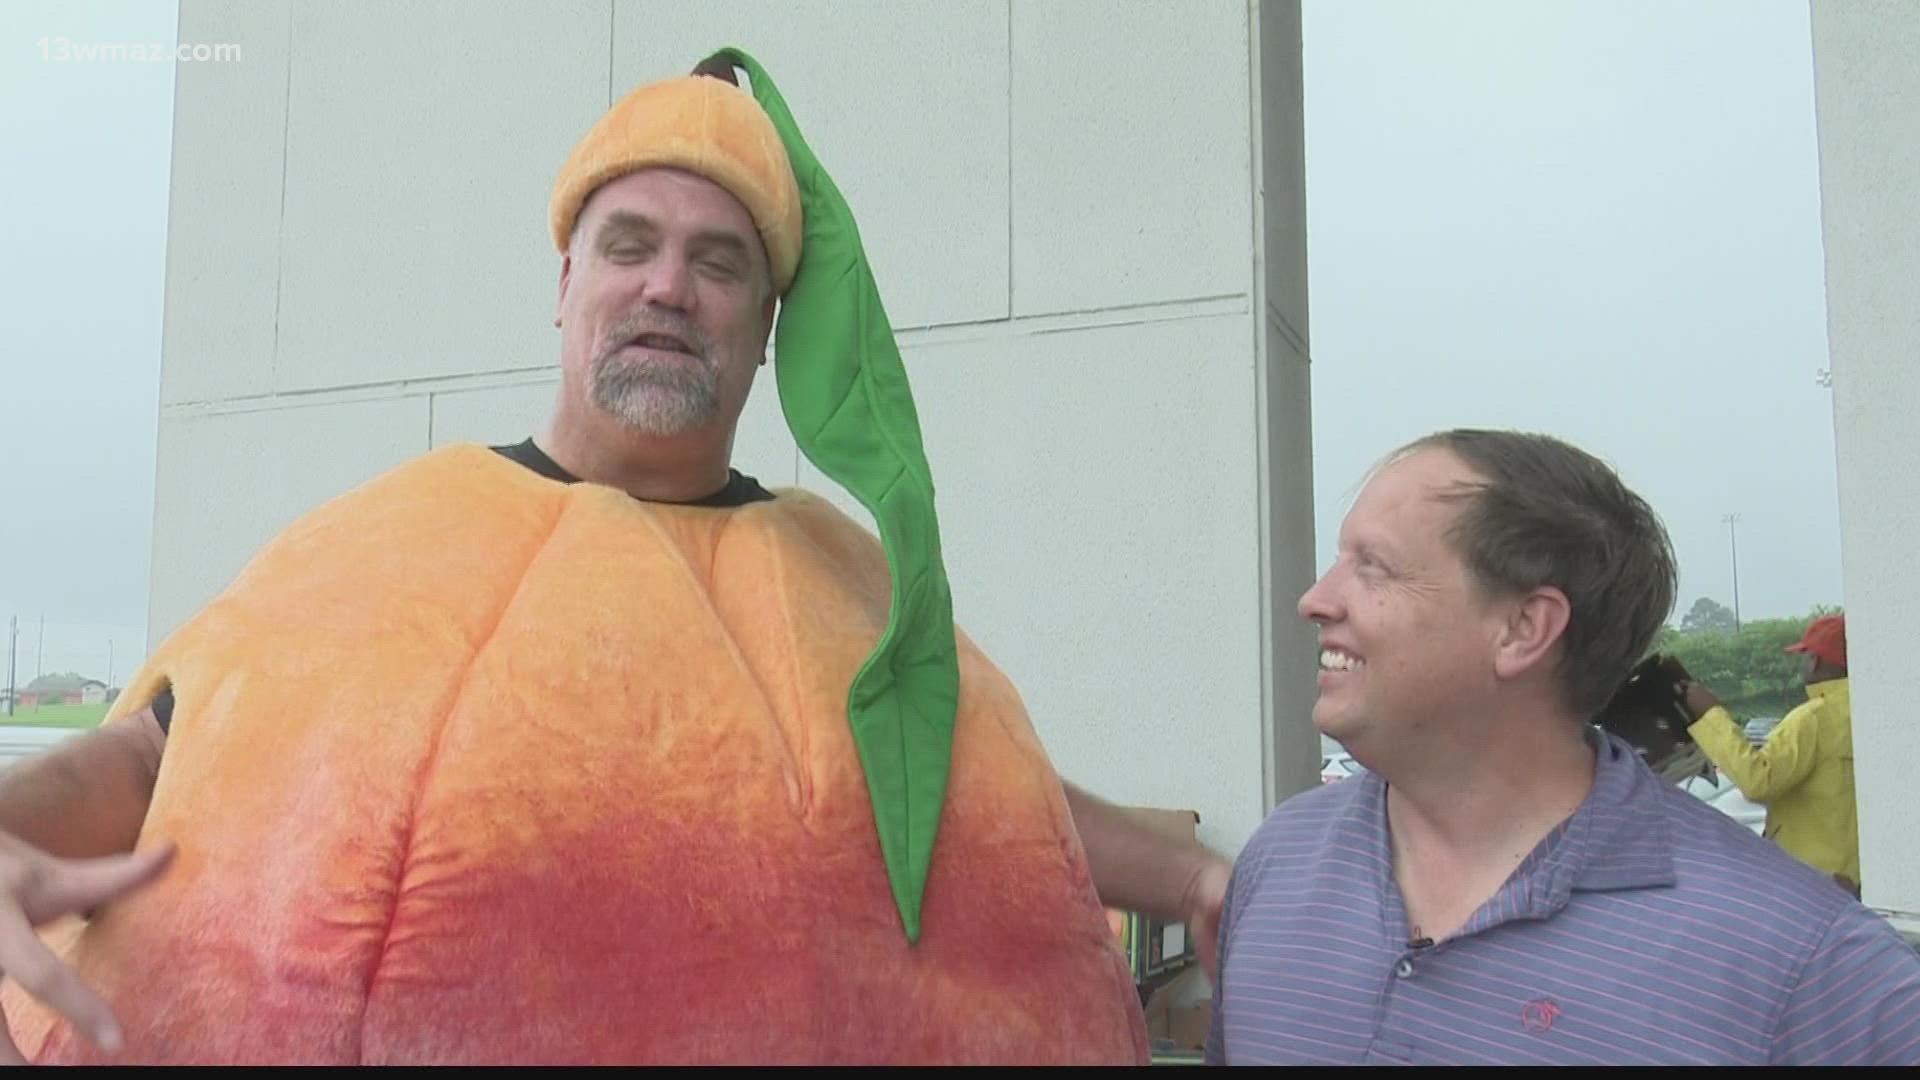 Nearly 40,000 pounds of produce like peaches, cucumbers, and corn were handed out to Macon families.